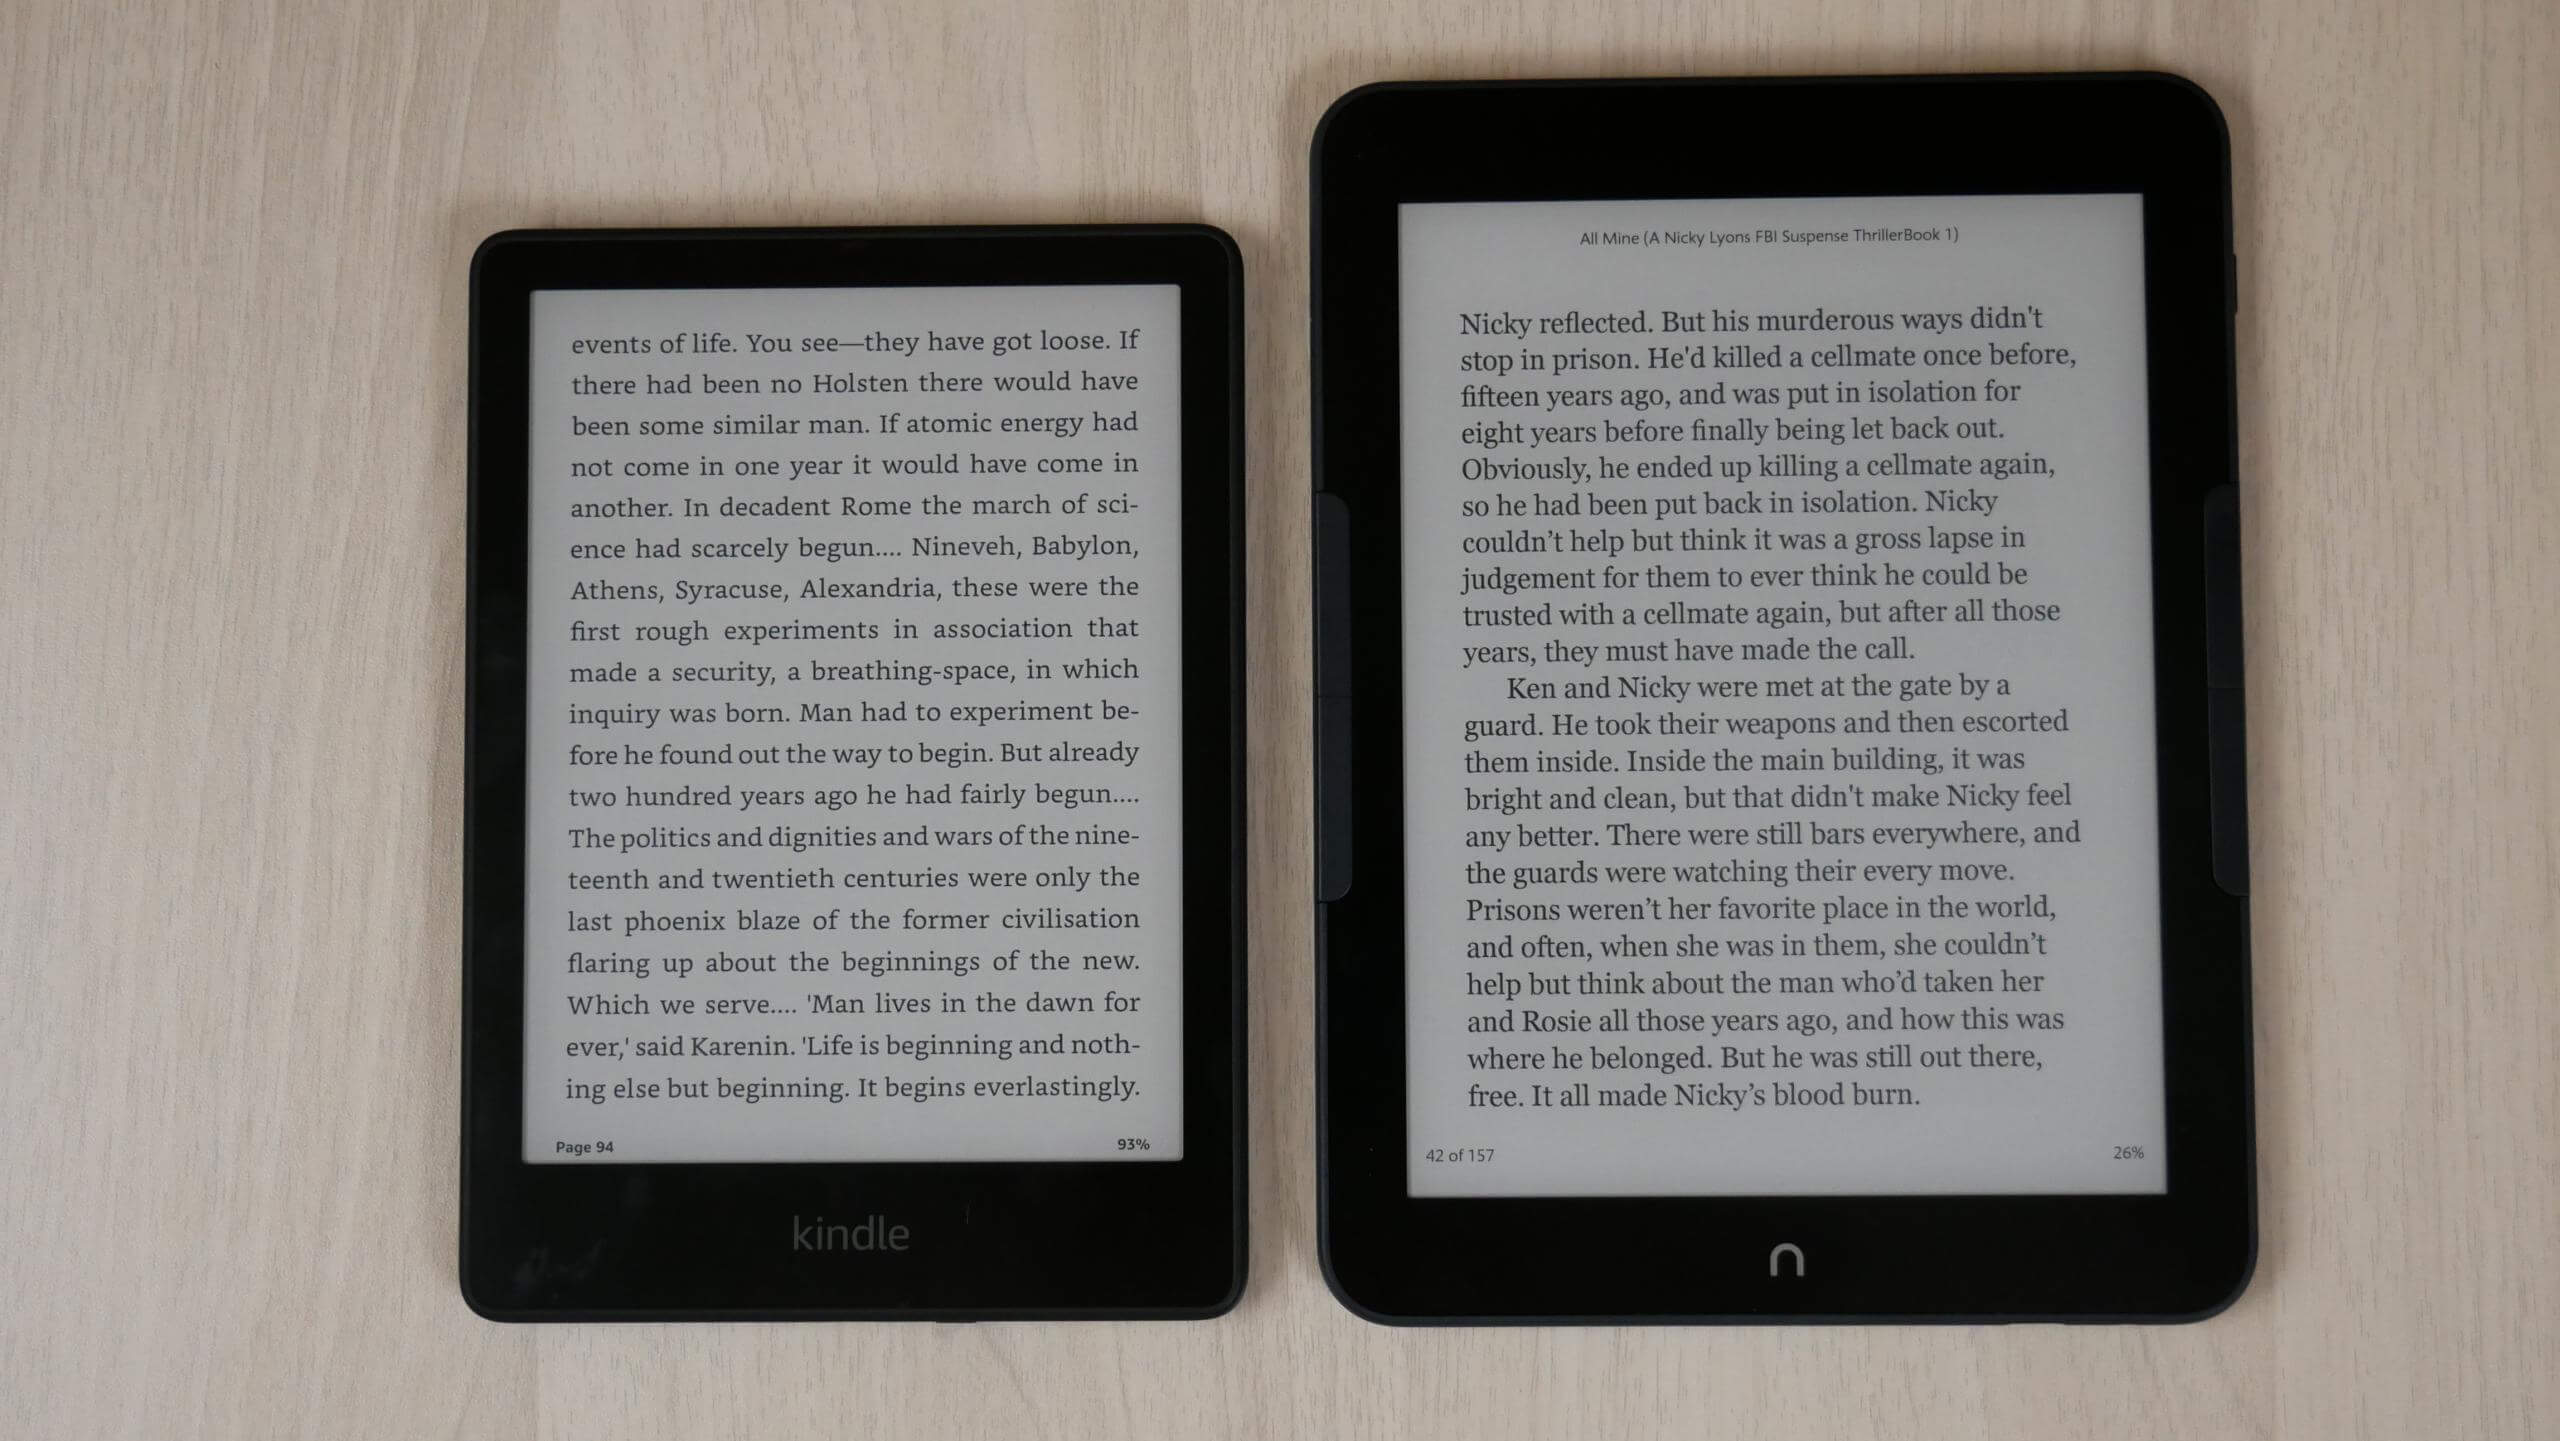 s Kindle Paperwhite returns with a bigger screen, USB-C and